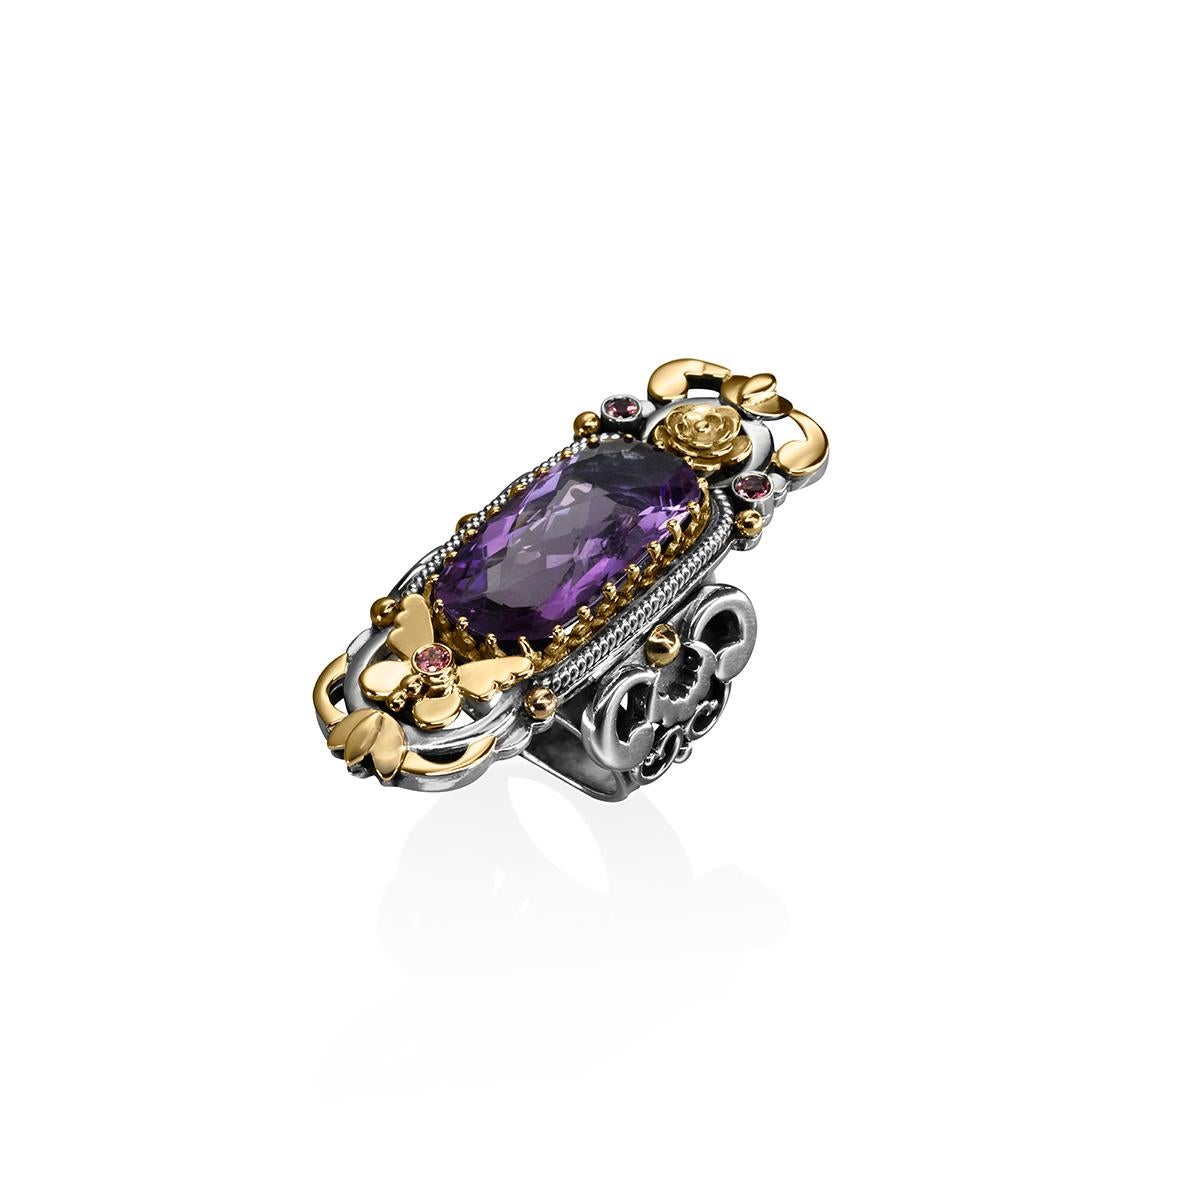 For Sale:  18 Karat Gold, Sterling Silver, Amethyst and Pink Tourmaline Limited Garden Ring 6